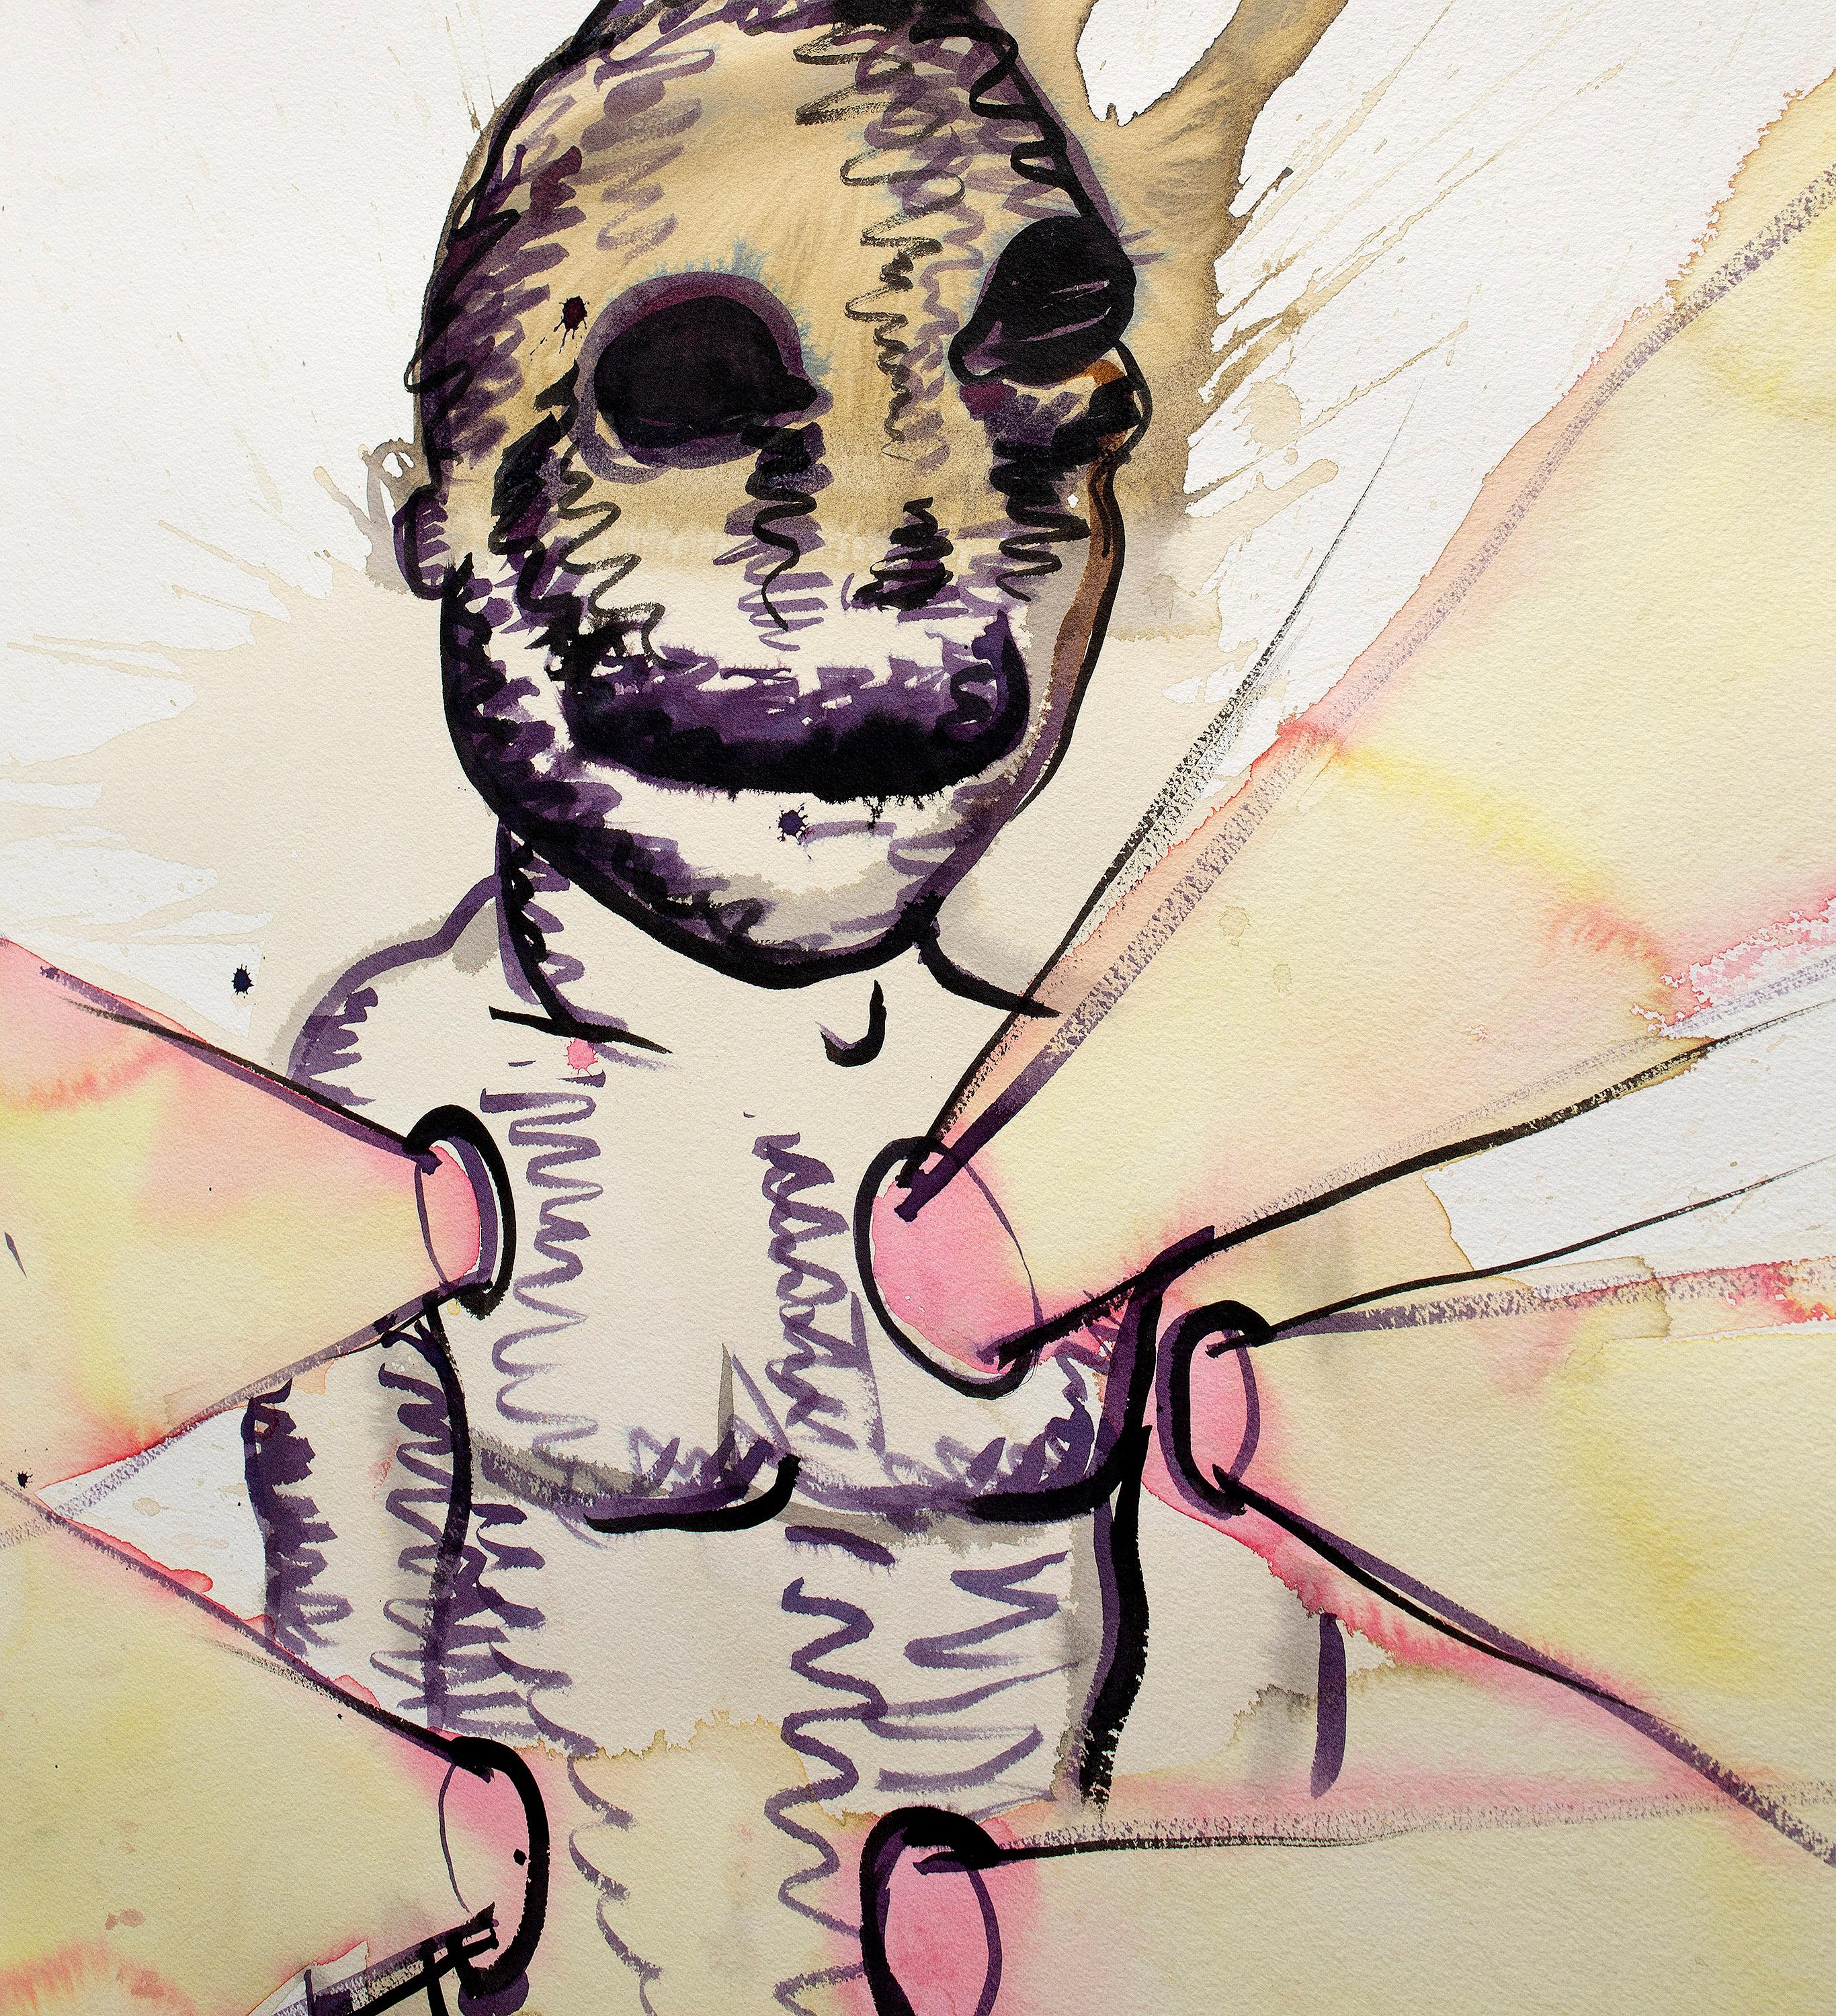 The Lightbulb Man is Bjarne Melgaard’s most acknowledged character. Also the absolutely rarest. The Lightbulb Man is often depicted with holes in its body, with light rays exiting or entering. These can give associations to the stains that can